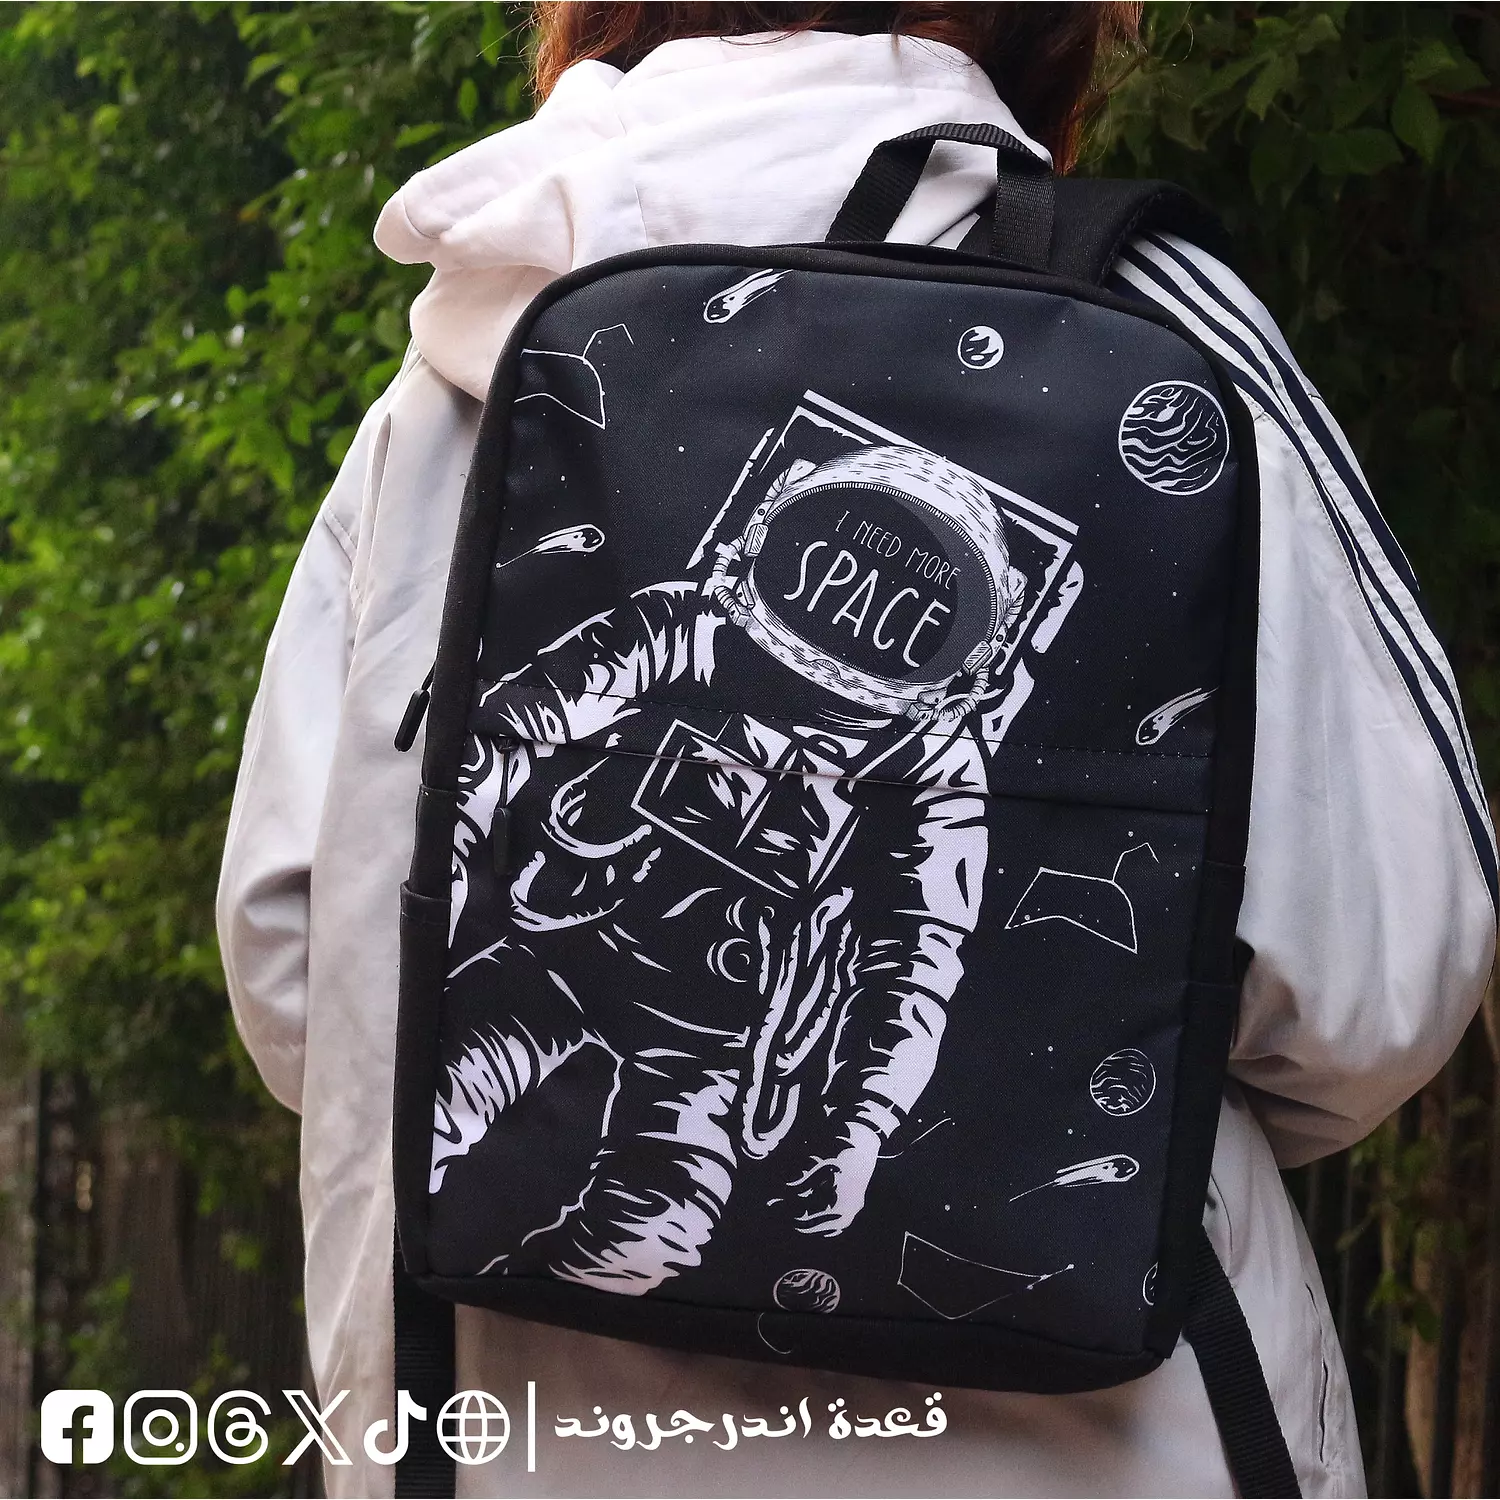 Need Some Space 🌌 🚀 Backpack 🎒 0